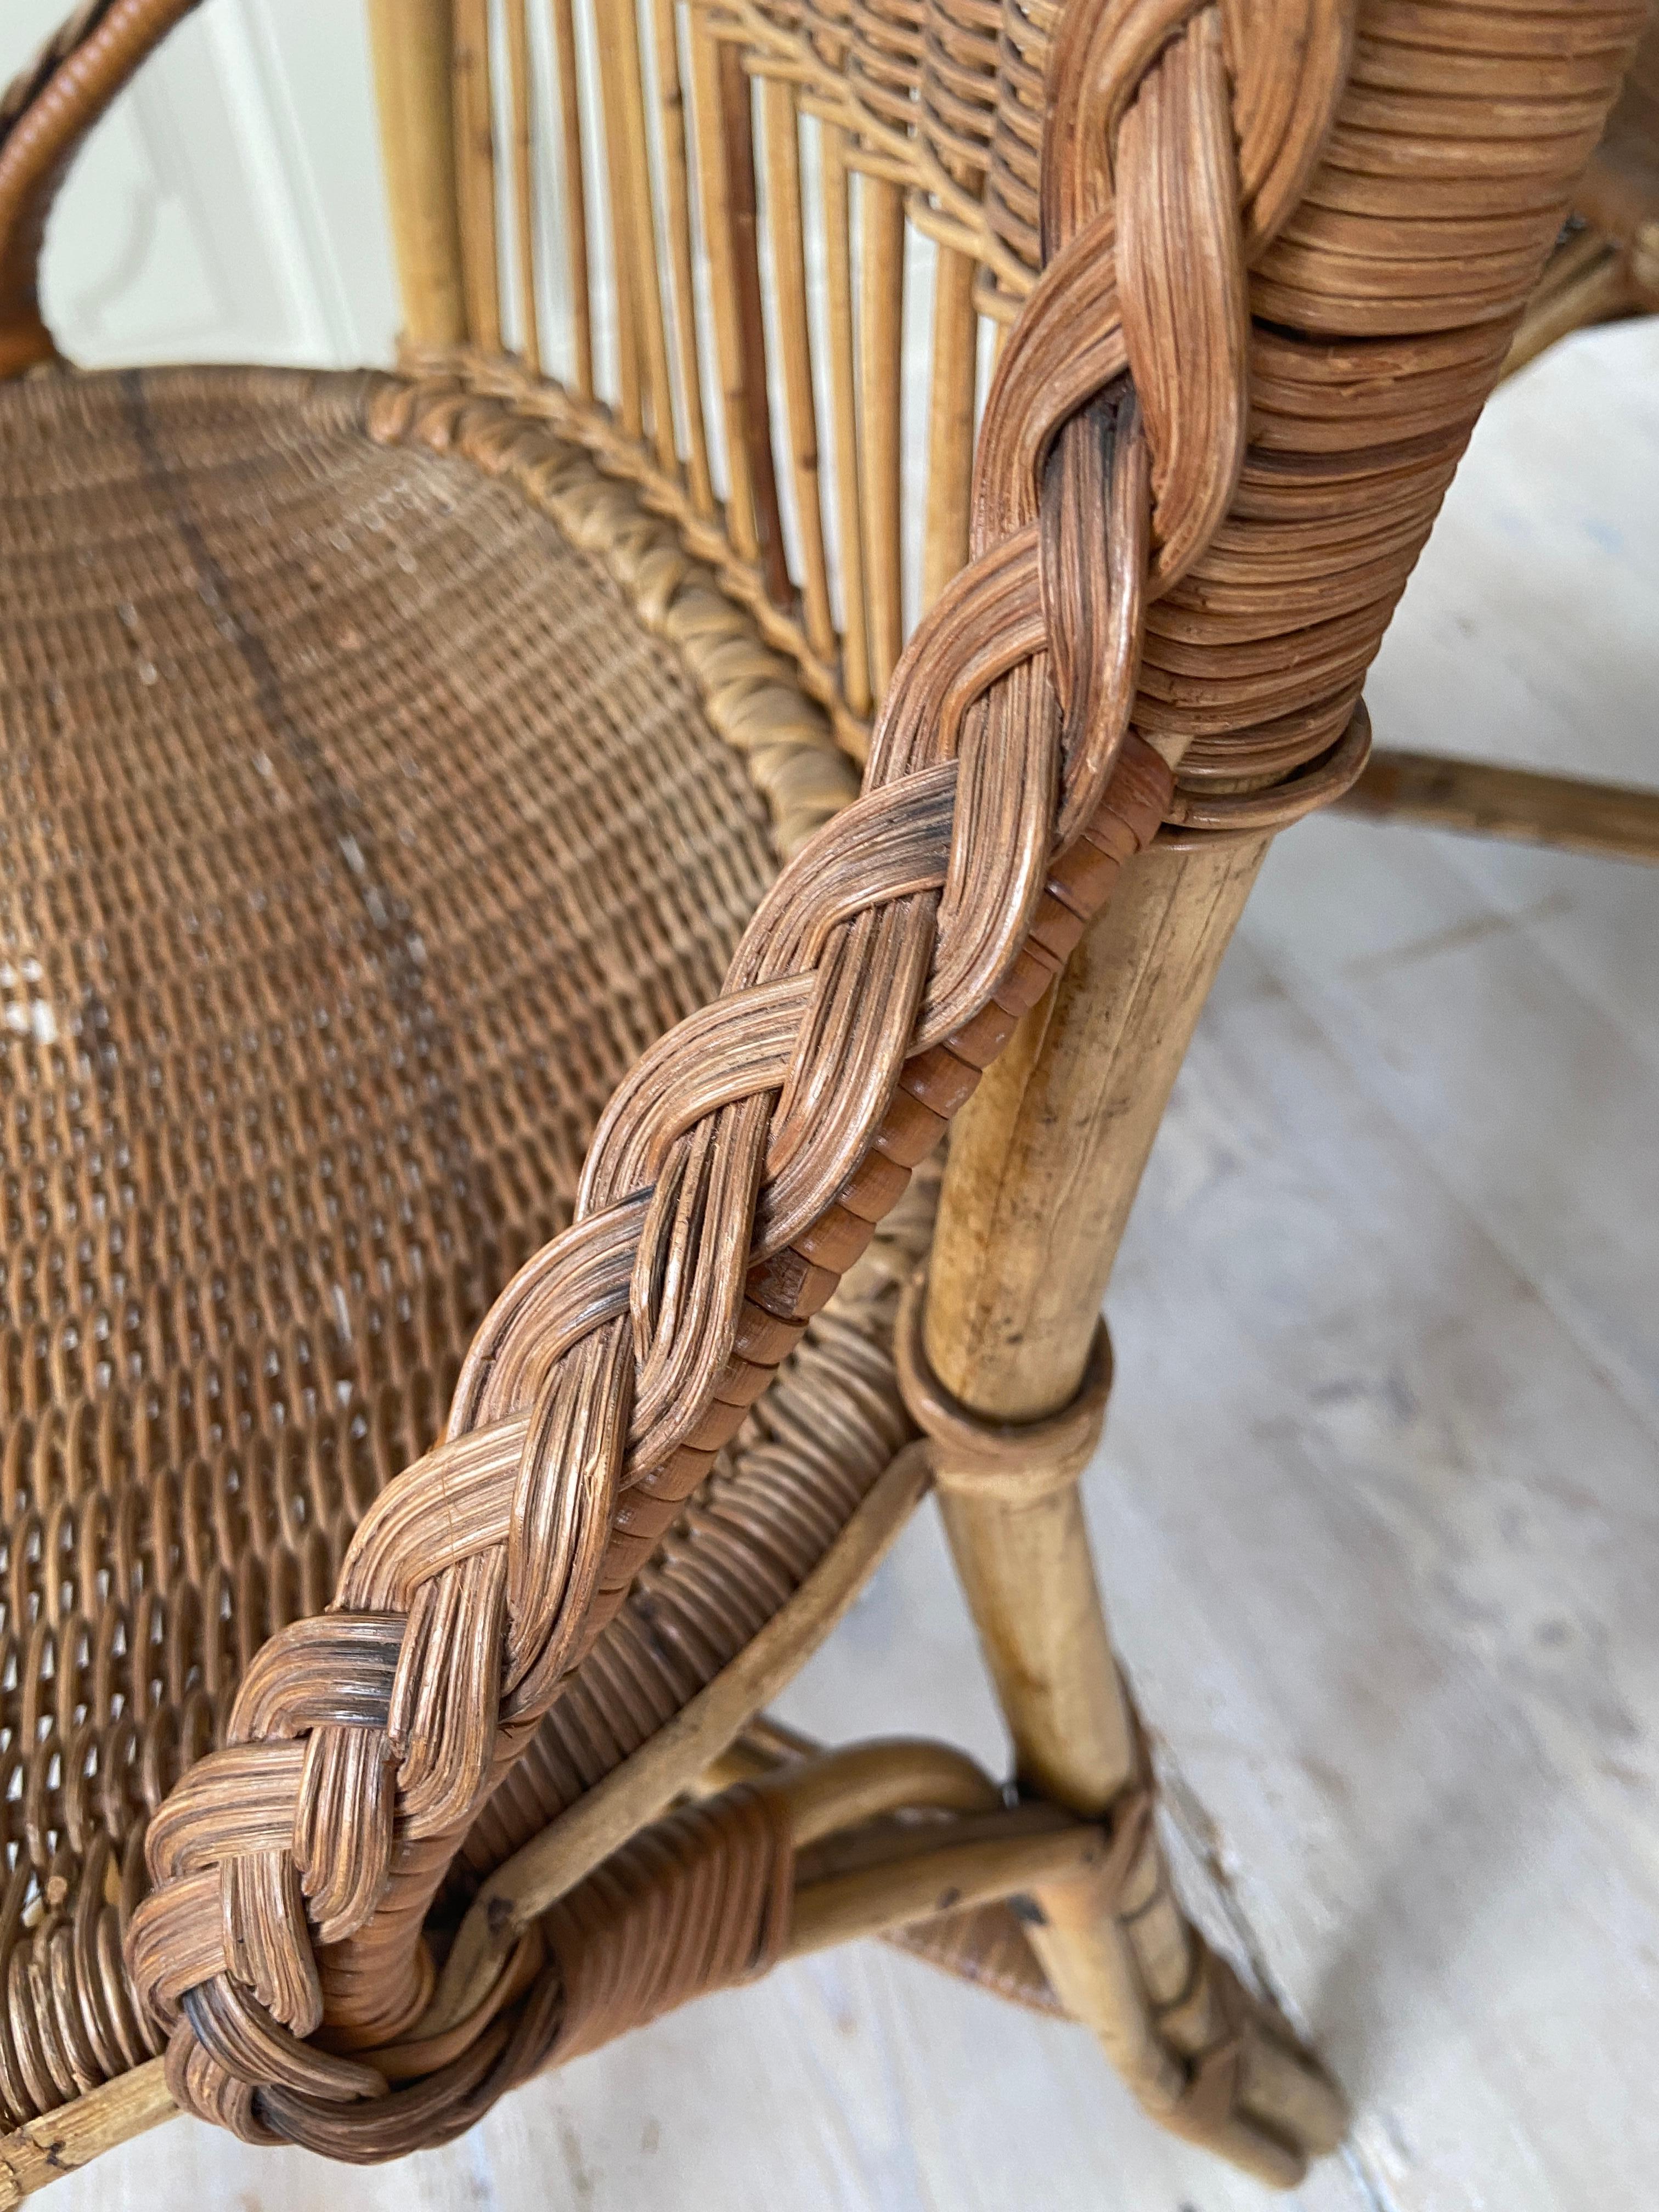 Mid-20th Century Vintage Rattan Chairs with Elegant Details, France, 1940s